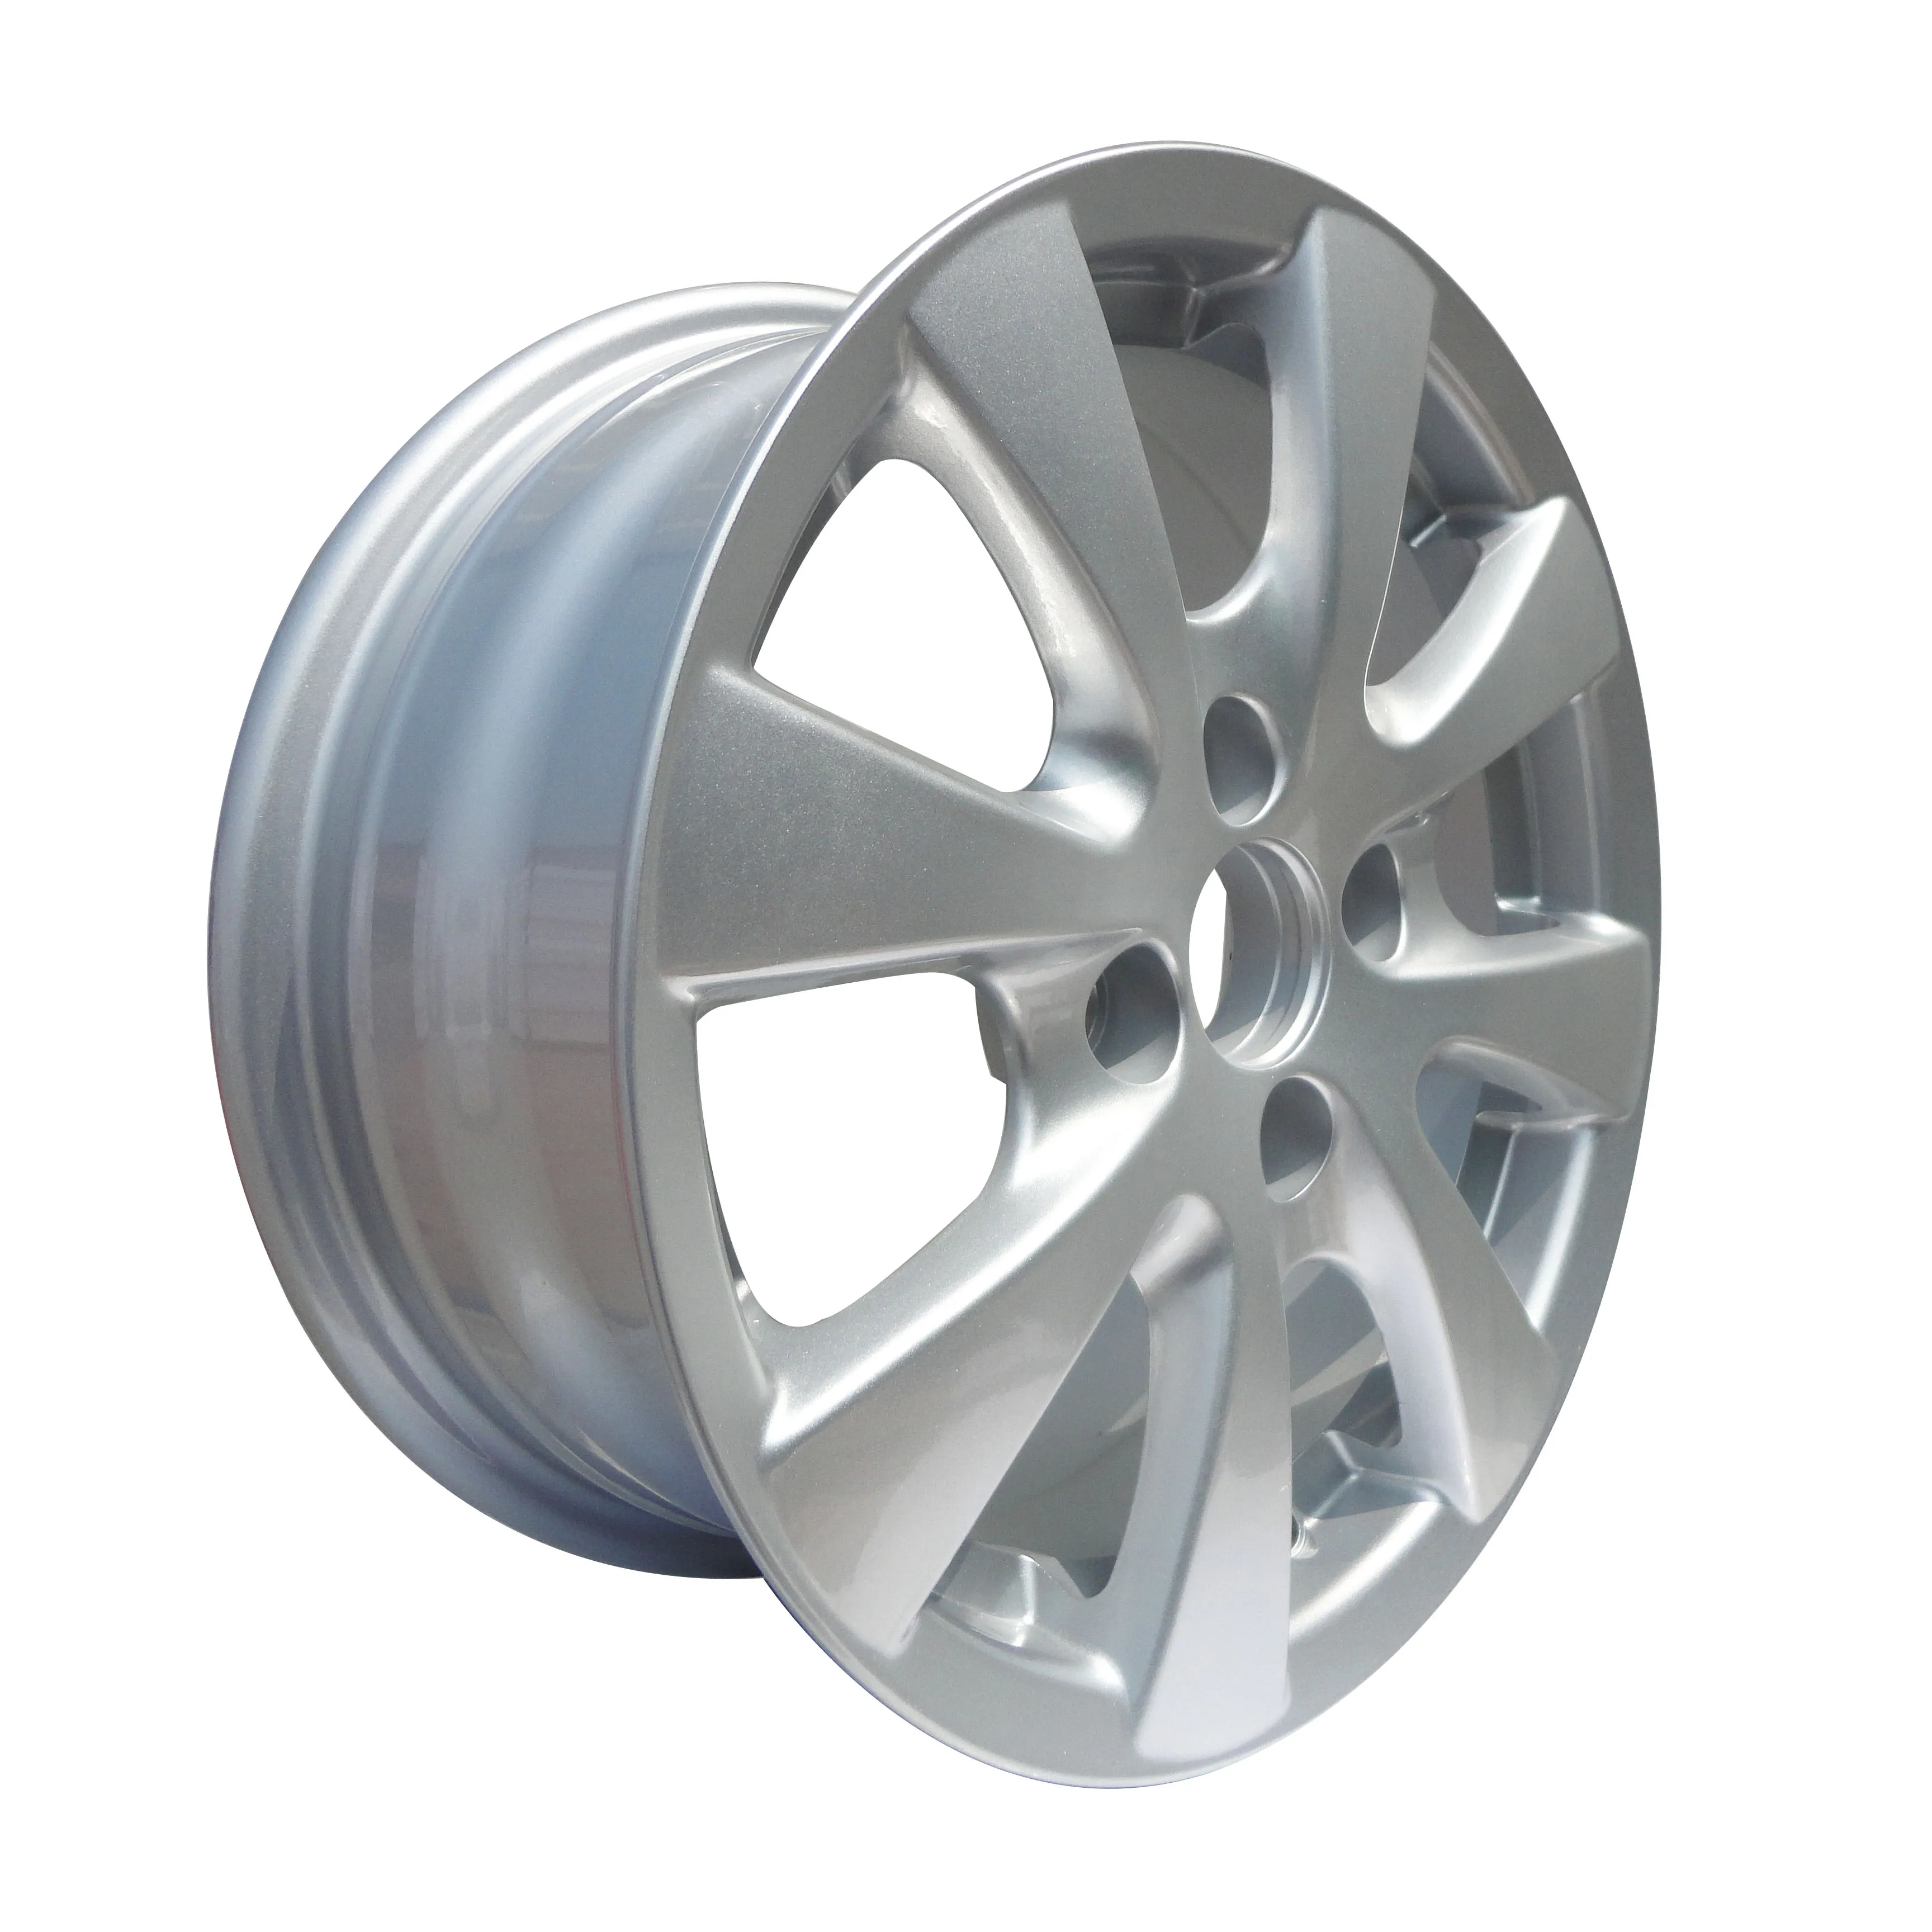 BS-4003 Made in China And New Style Alloy Aluminum Cars Wheel Rim